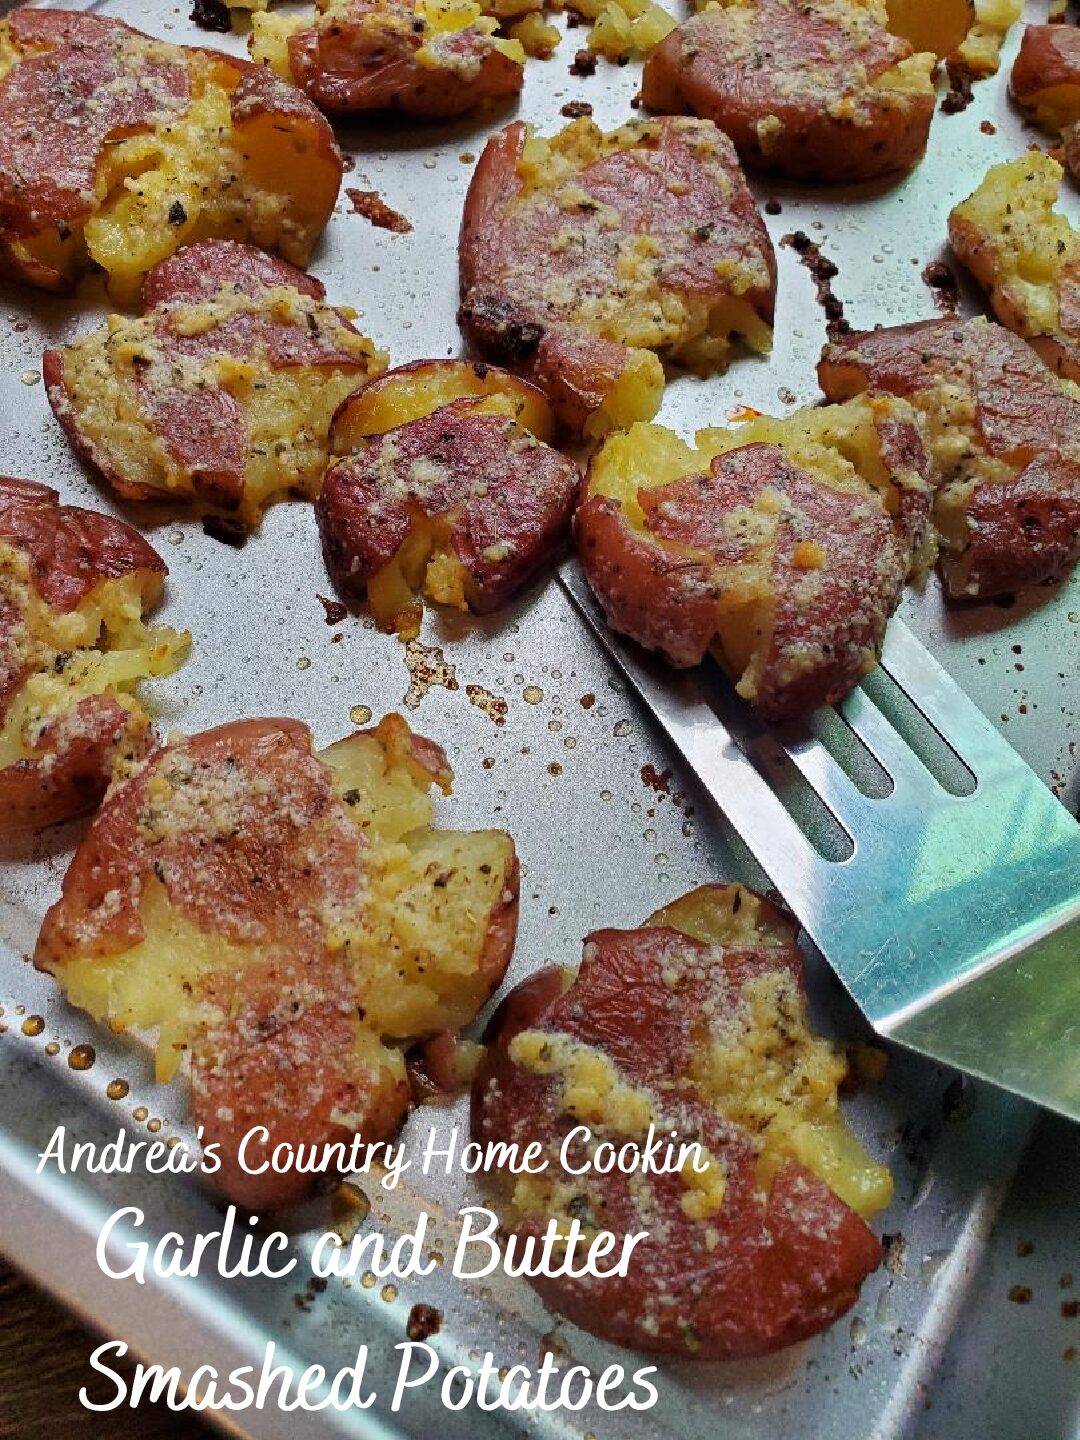 Garlic and Butter Smashed Potatoes